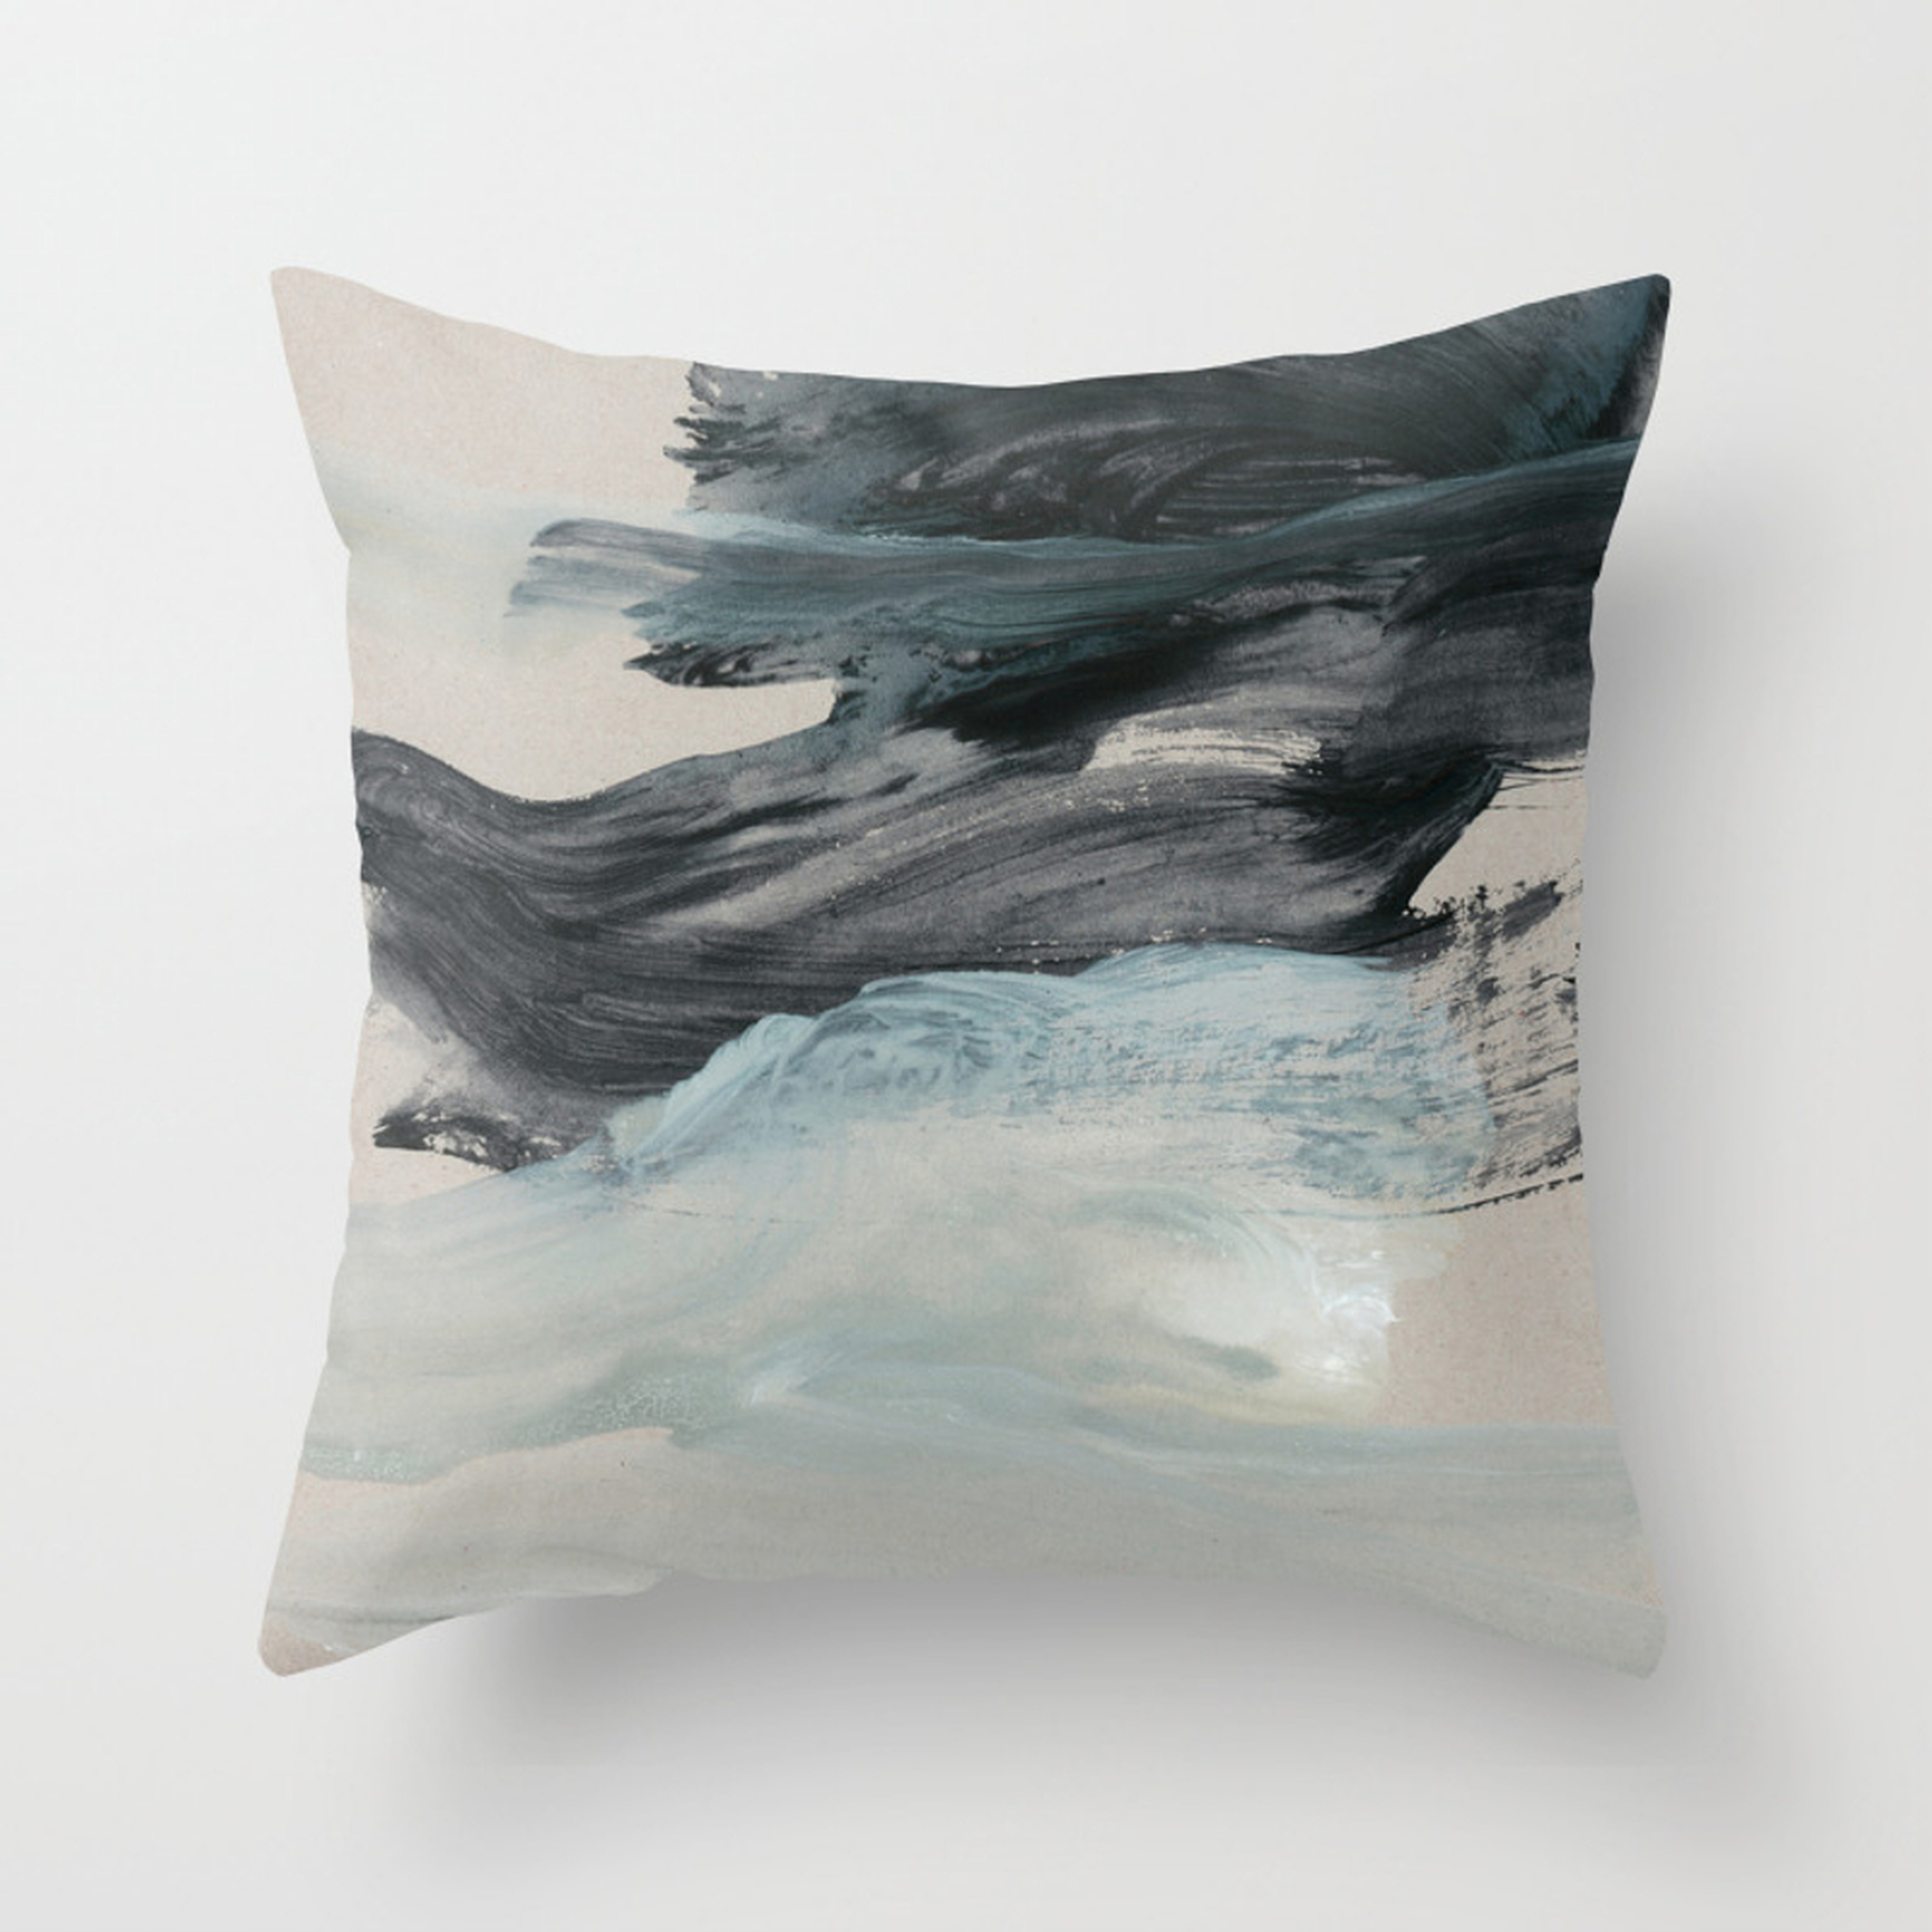 Minimal Brushstrokes 3 Throw Pillow by Iris Lehnhardt - Cover (18" x 18") With Pillow Insert - Indoor Pillow - Society6